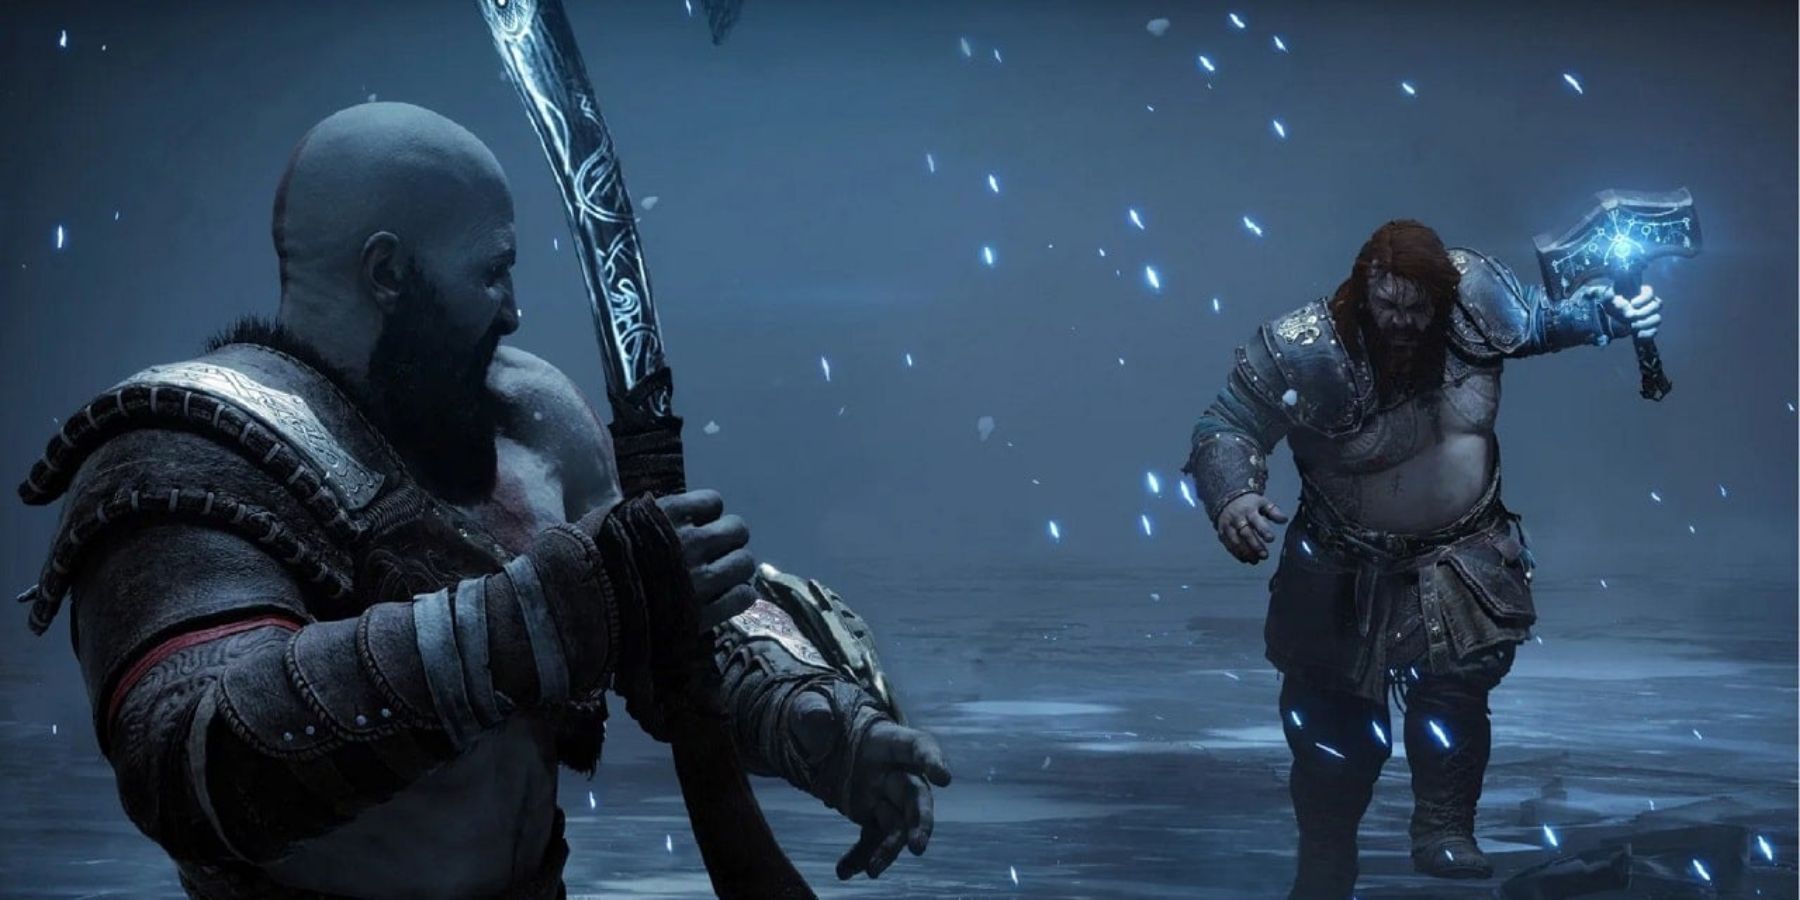 Kratos about to battle Thor